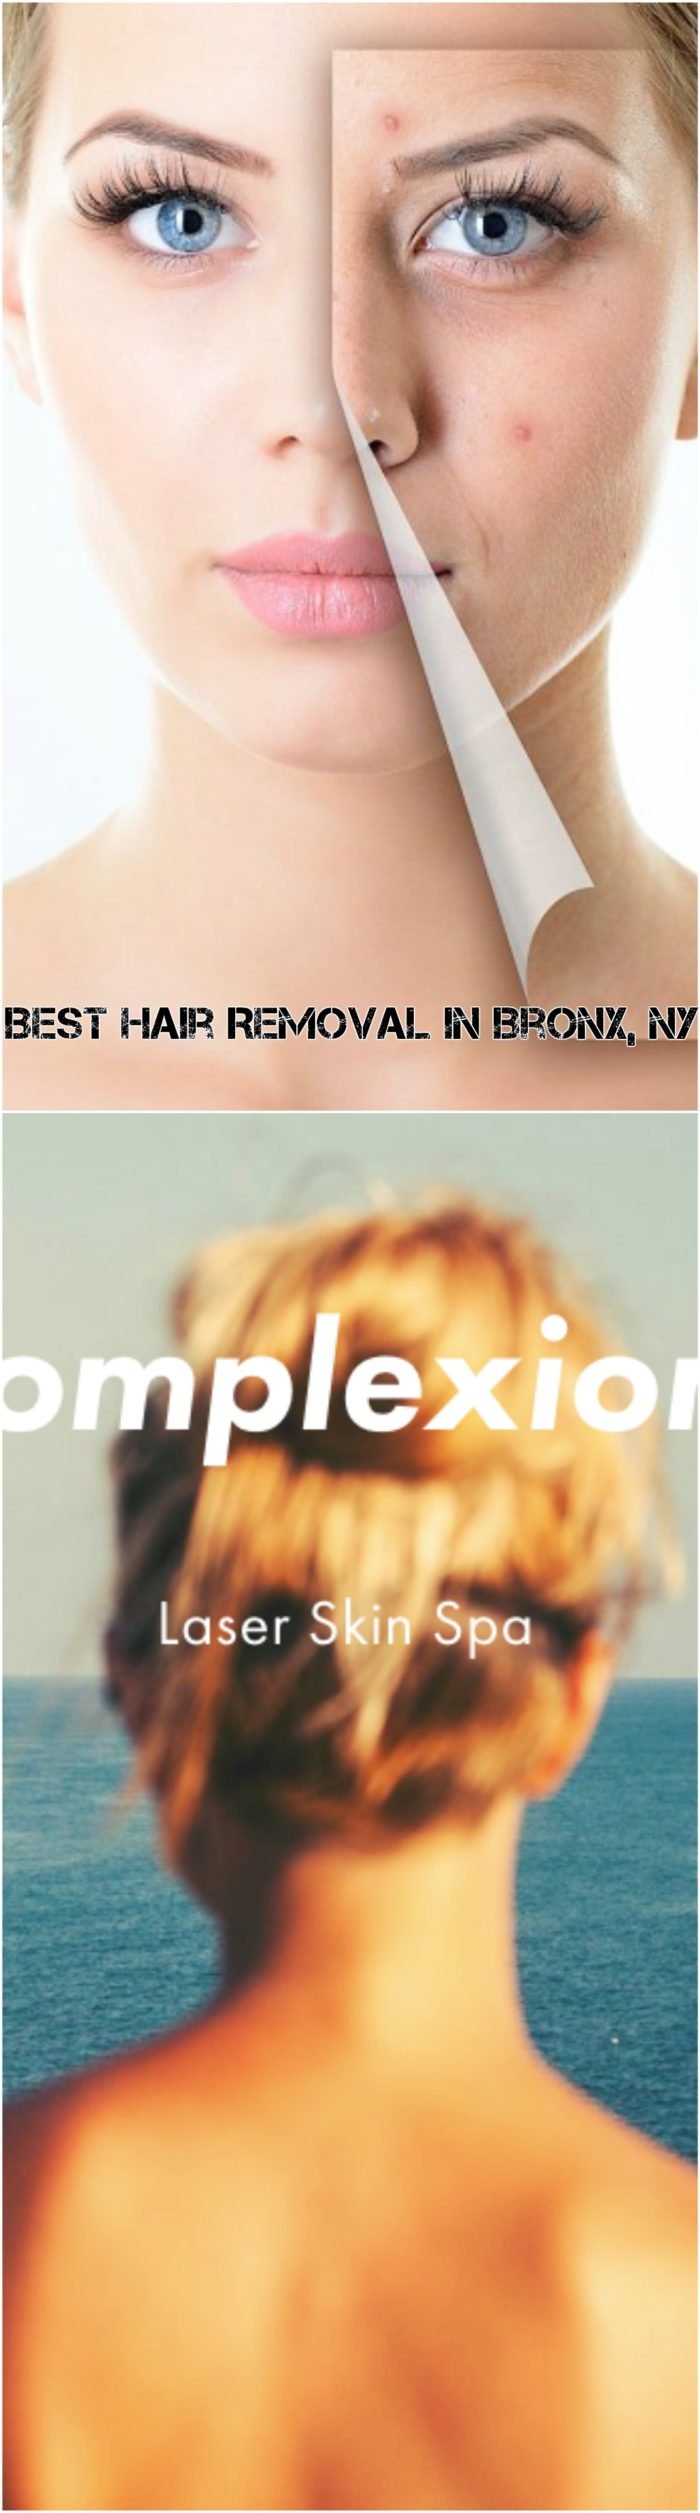 Best Hair Removal In Bronx